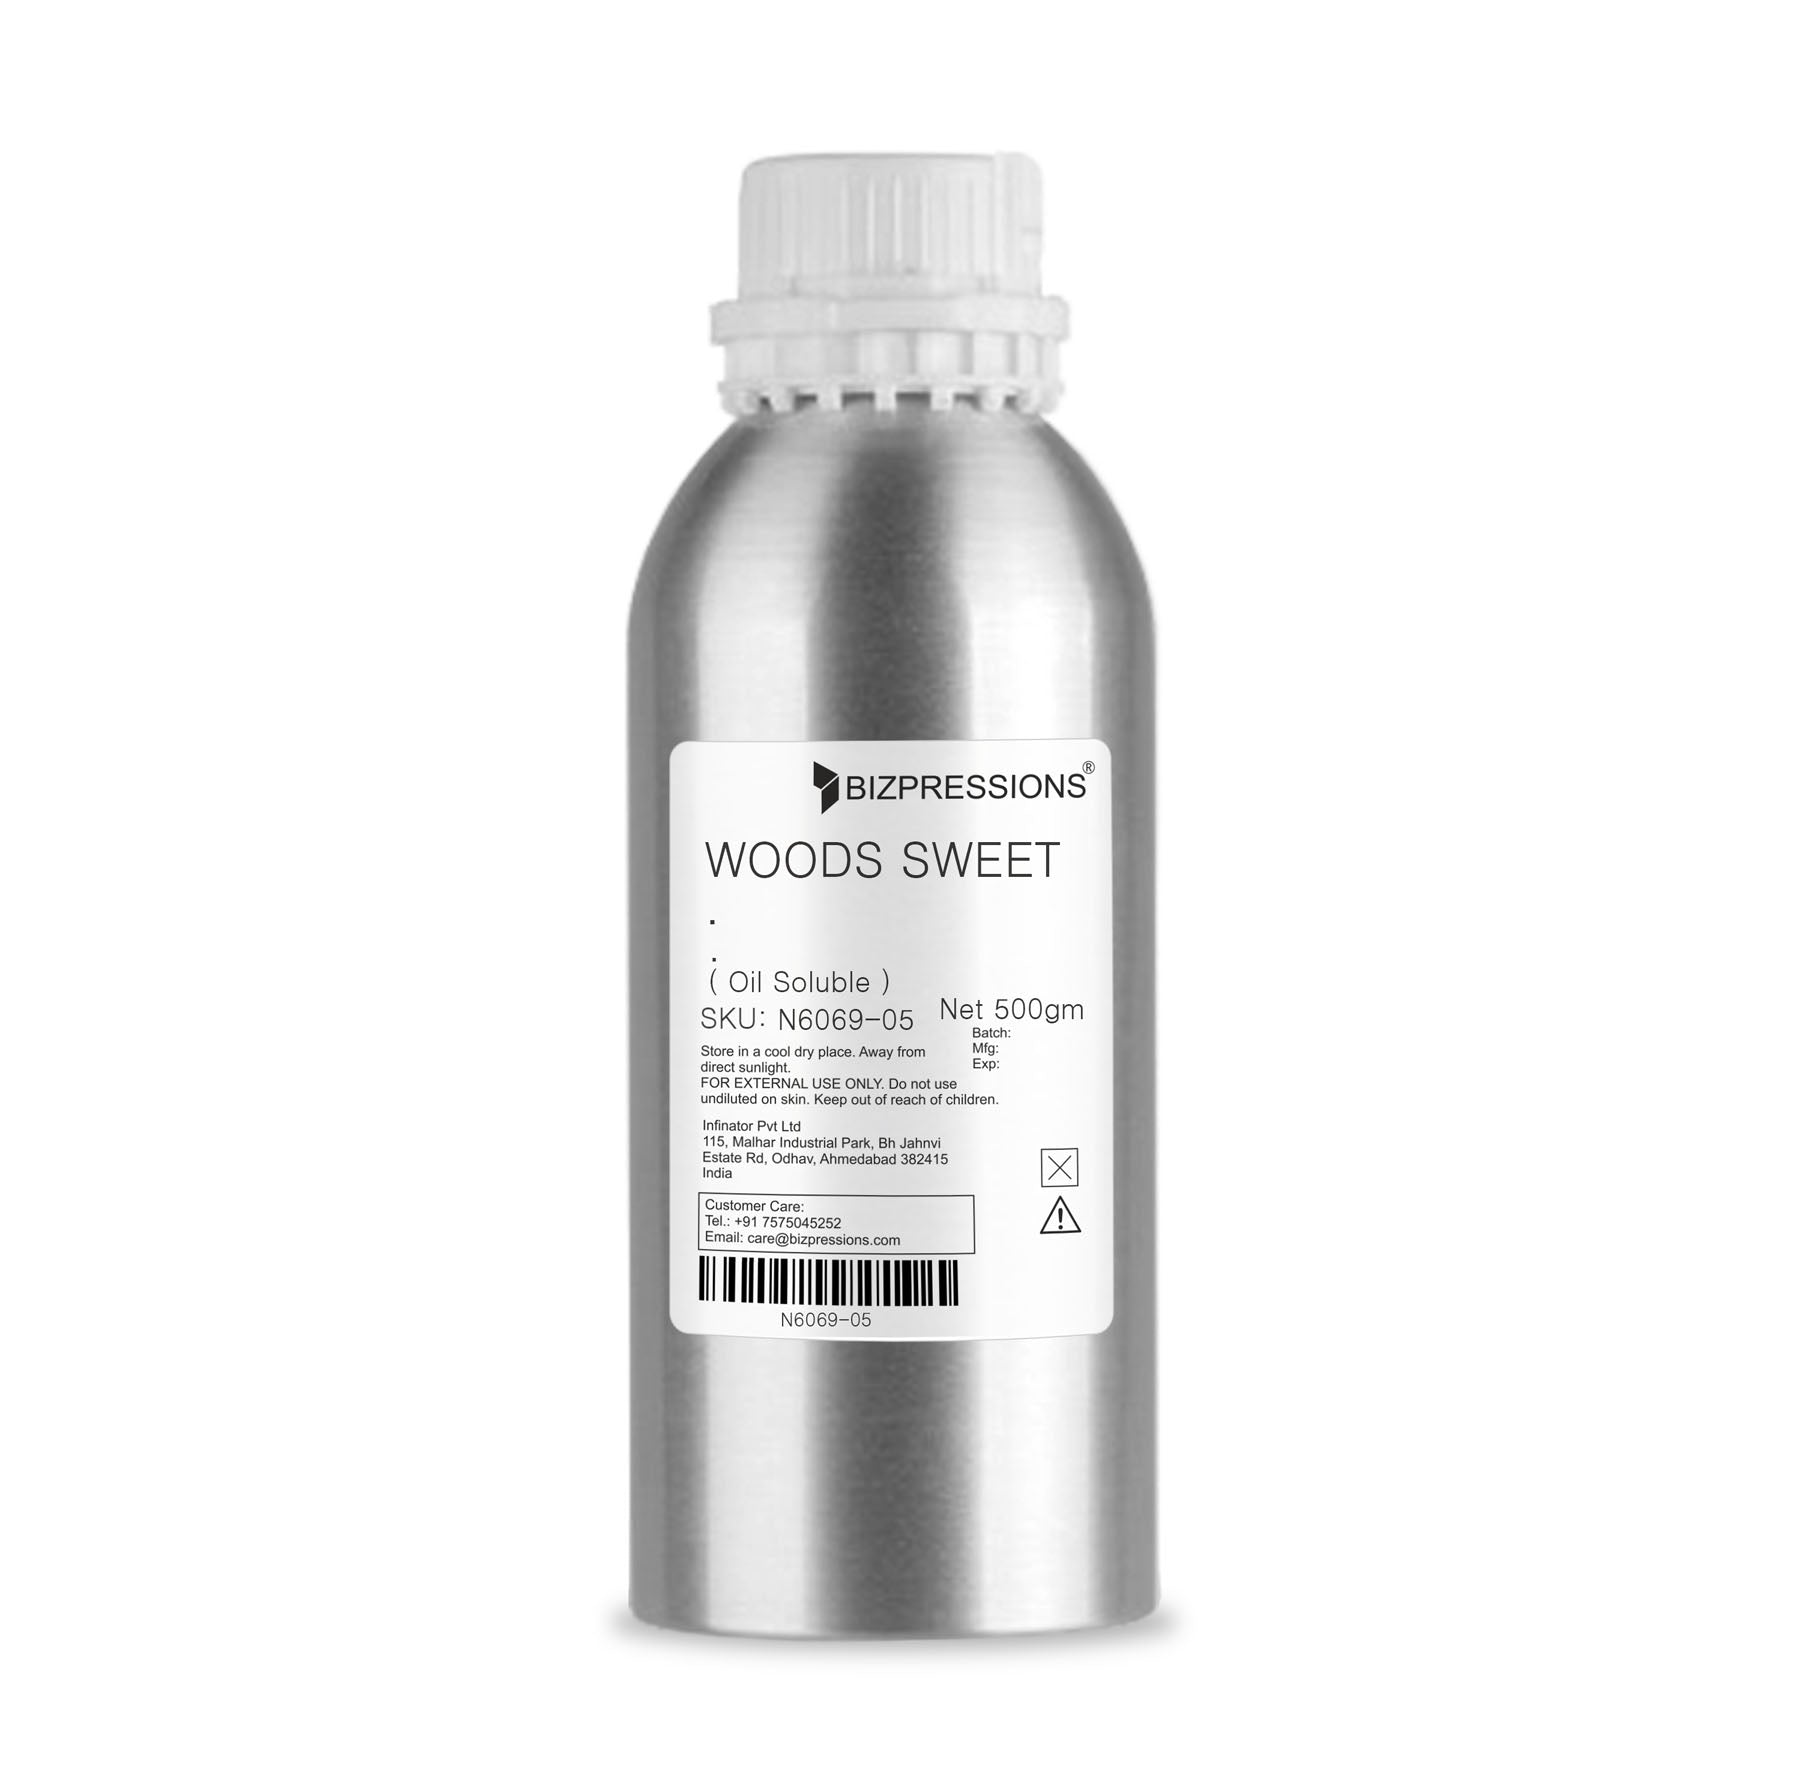 WOODS SWEET - Fragrance ( Oil Soluble ) - 500 gm